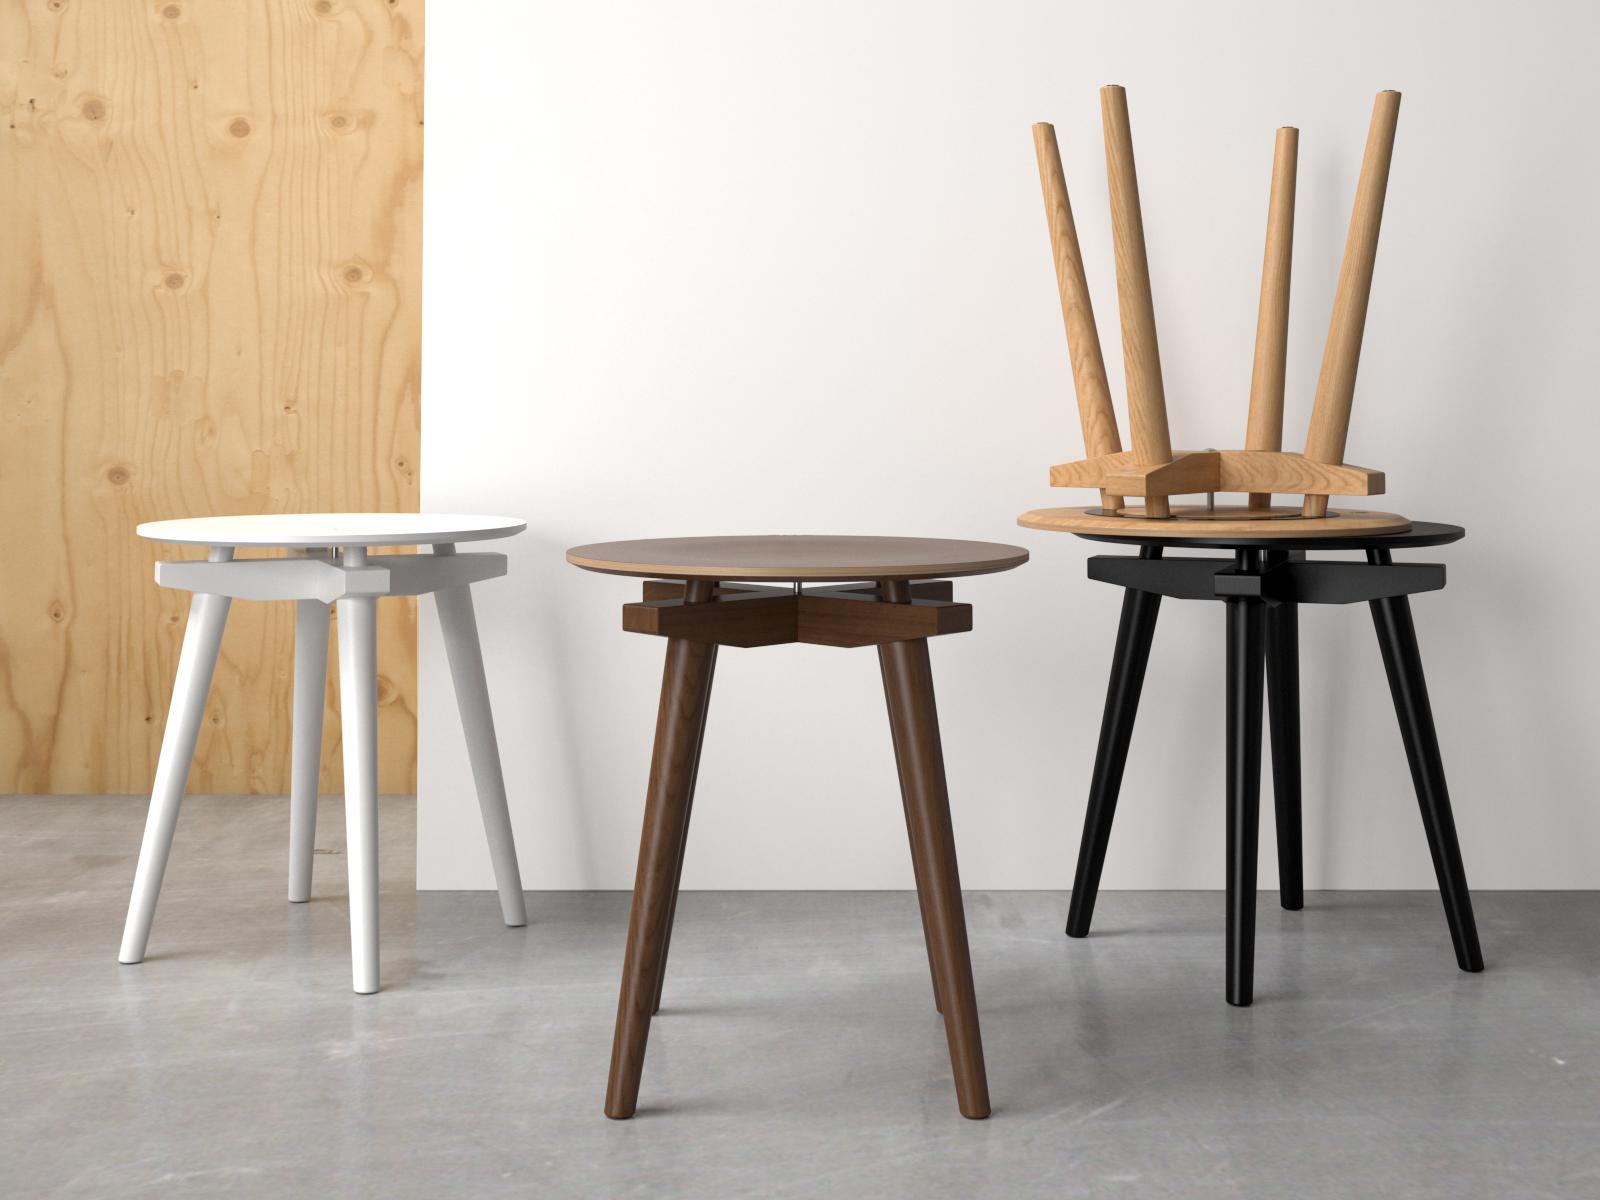 Contemporary CC Stool in Natural Walnut, solid wood frame and curved seat, H44 cm, D40 cm For Sale